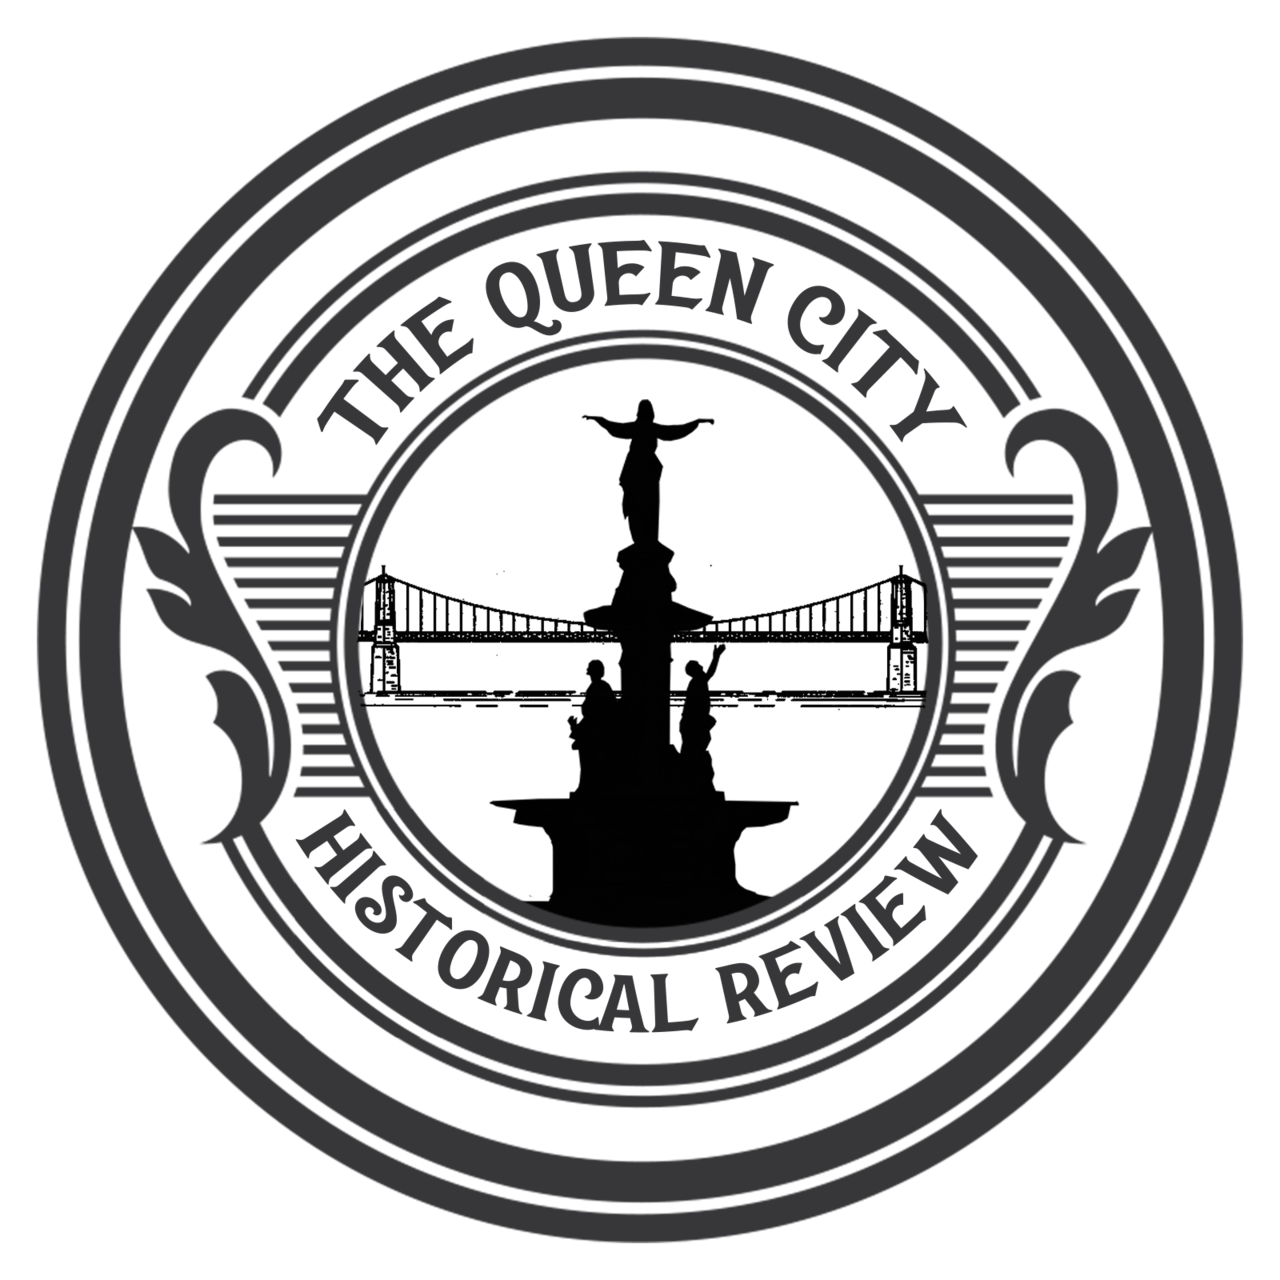 The Queen City Historical Review 